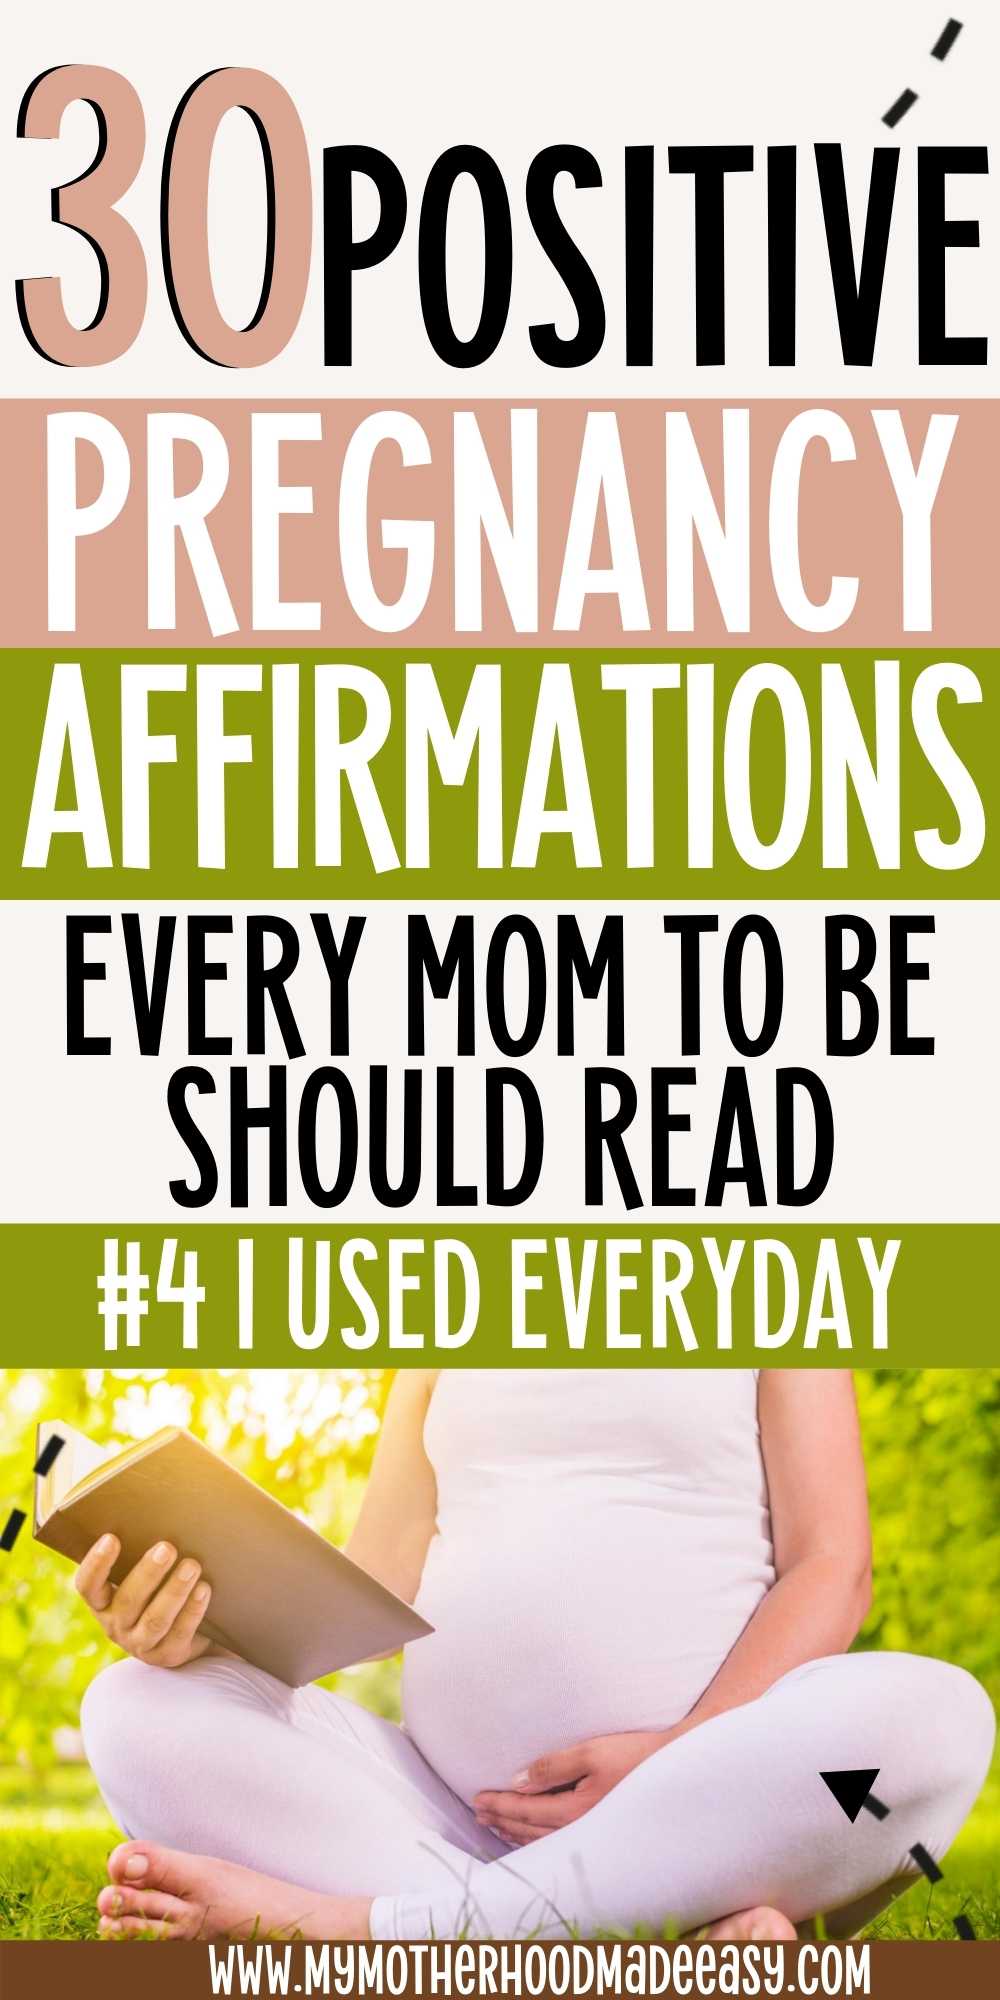 Looking for the perfect positive pregnancy affirmations you can recite for the first trimester, second trimester, and even the third trimester? Check out these 30 amazing positive pregnancy affirmations every mom to be should read!